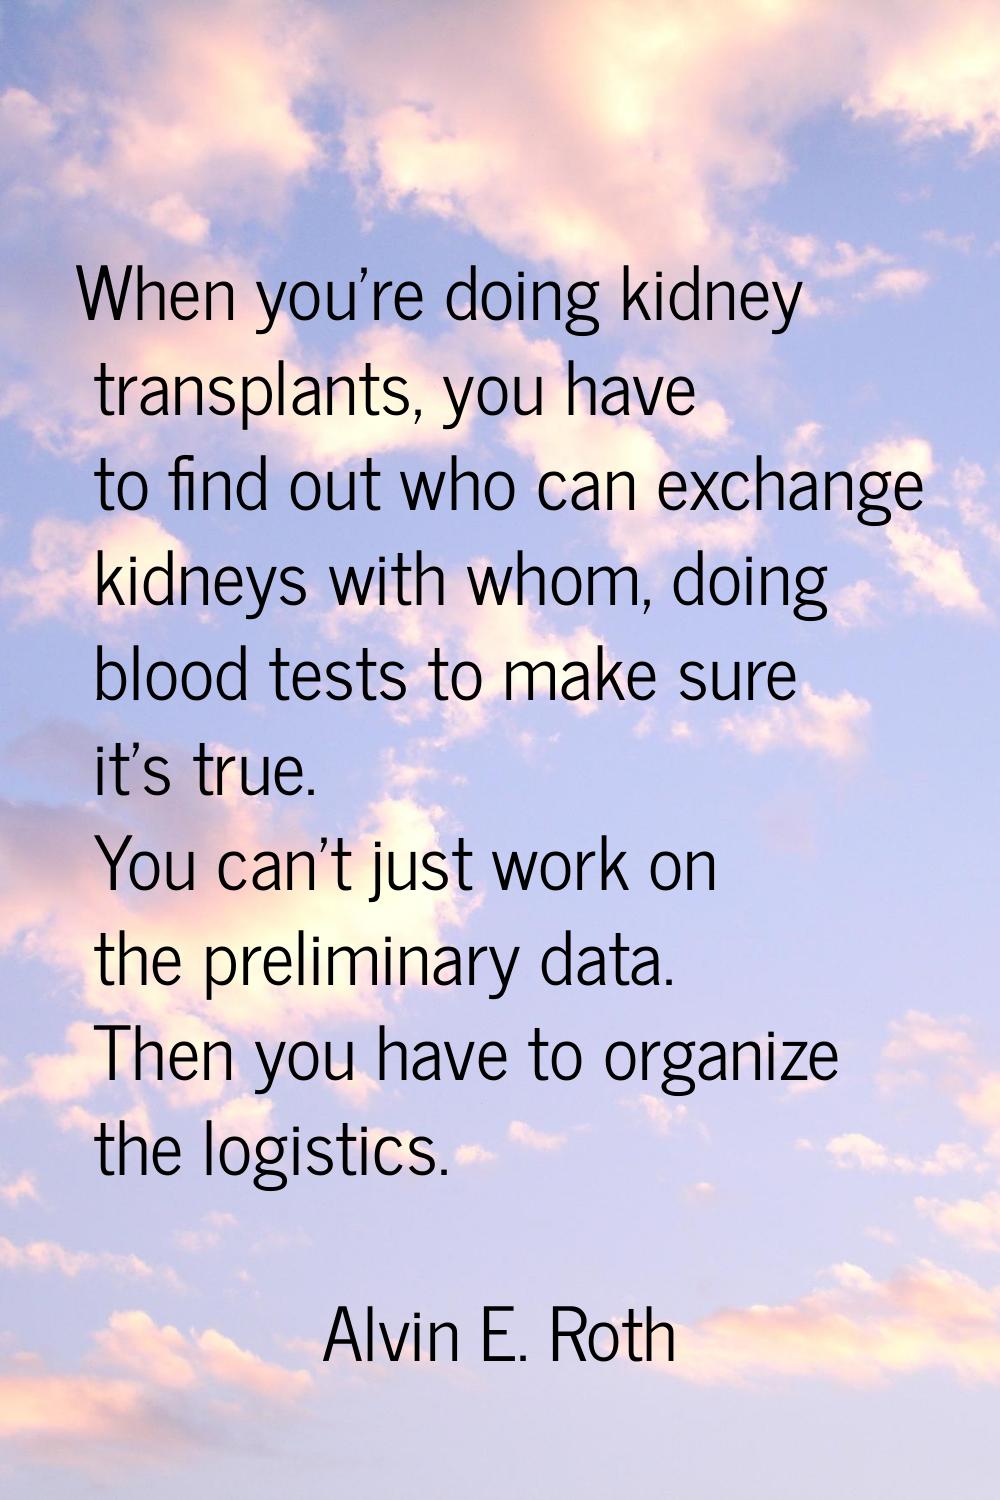 When you're doing kidney transplants, you have to find out who can exchange kidneys with whom, doin